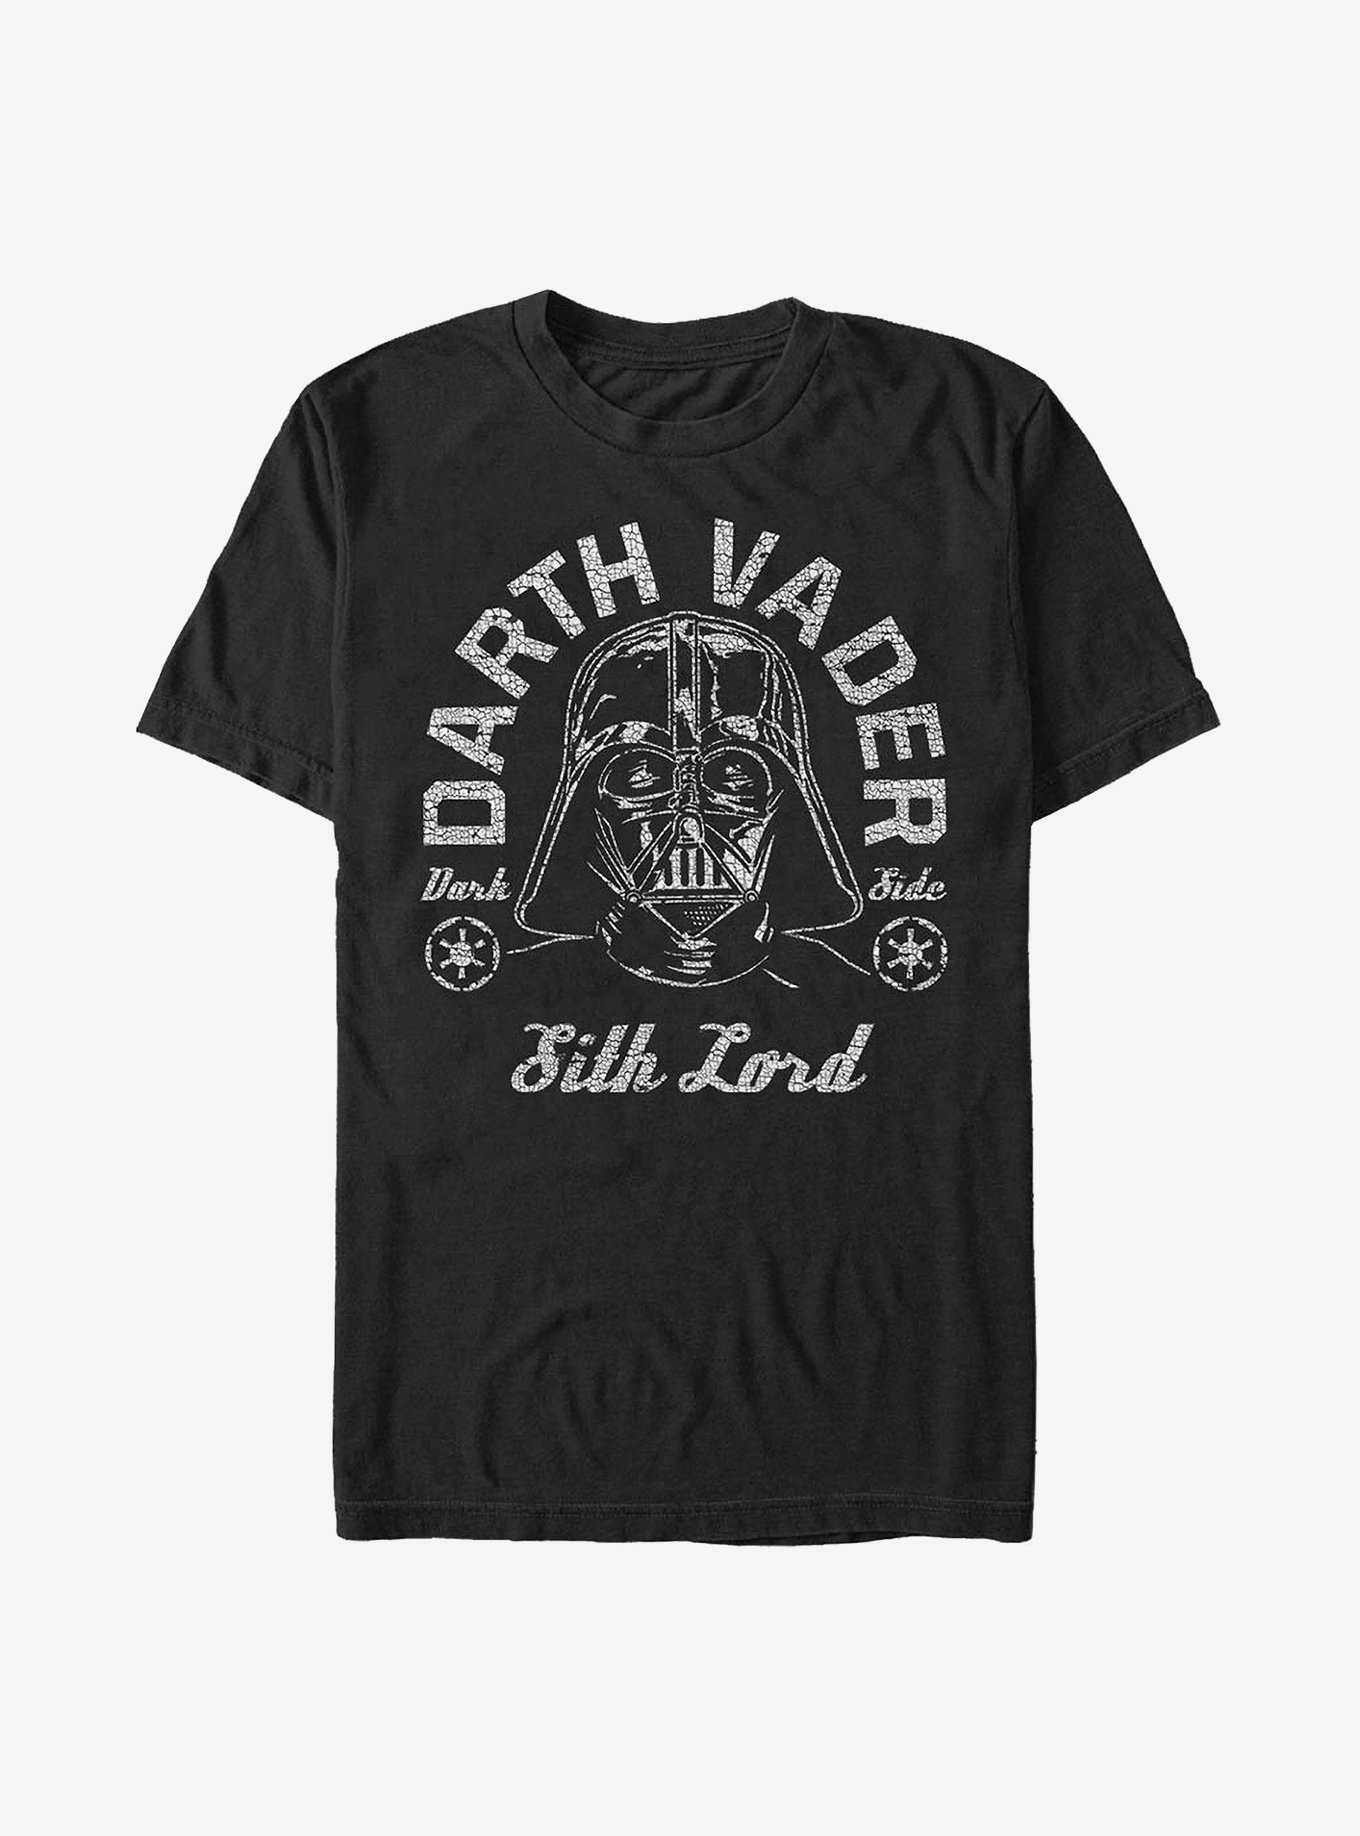 Star Wars Sith Lord Crackle T-Shirt, , hi-res